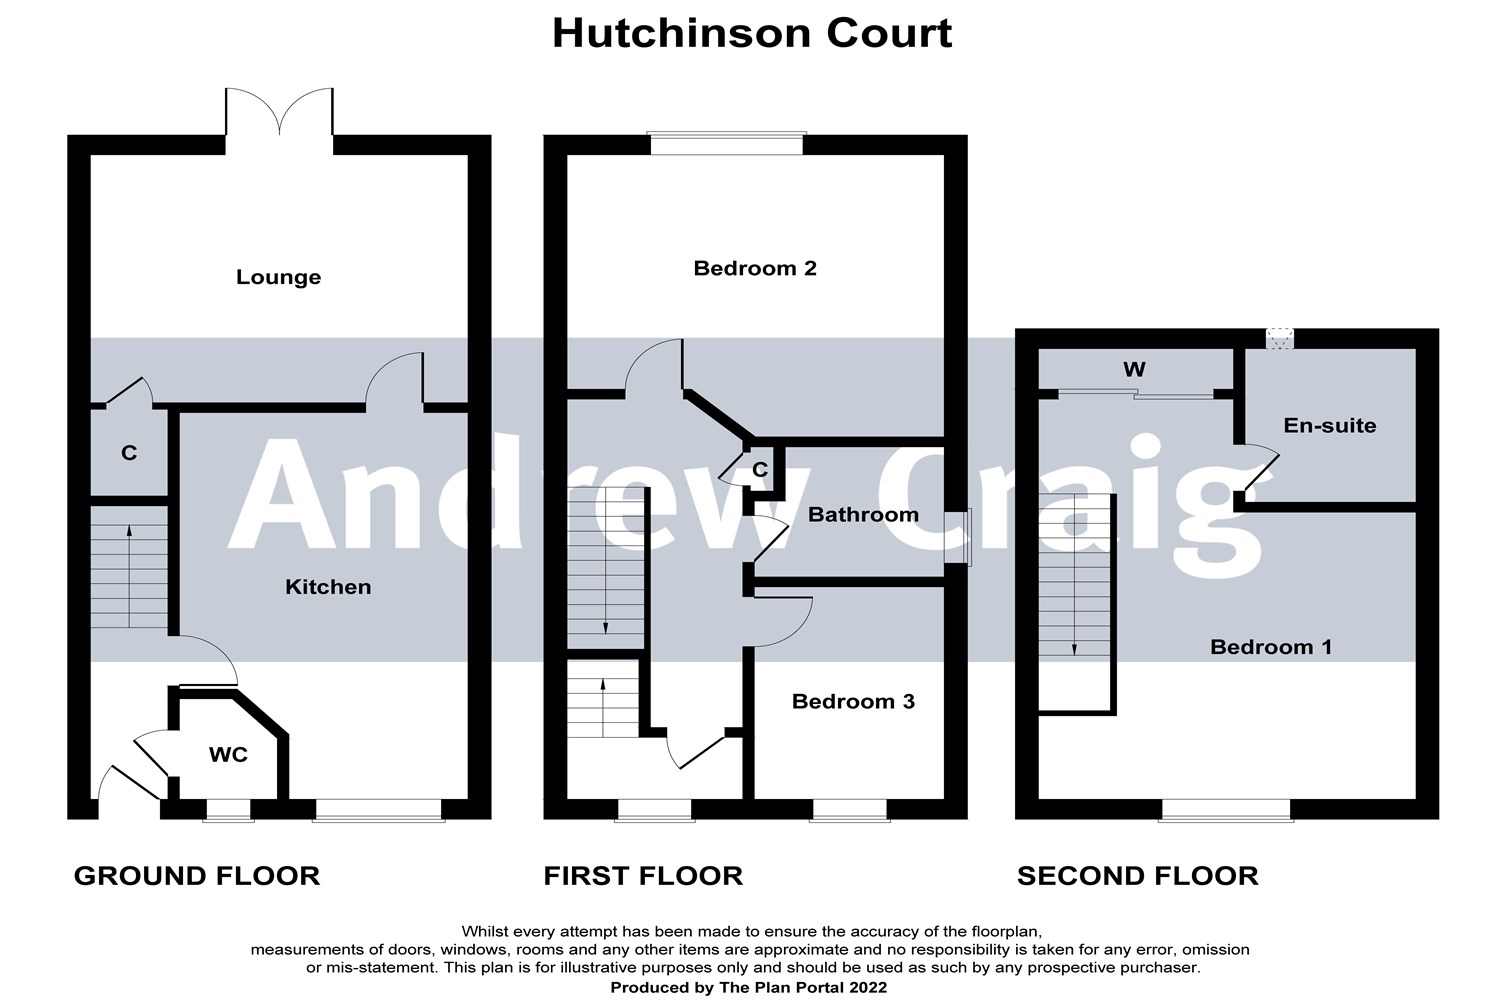 3 bed end of terraced town house for sale in Hutchinson Court, Newcastle Upon Tyne - Property floorplan